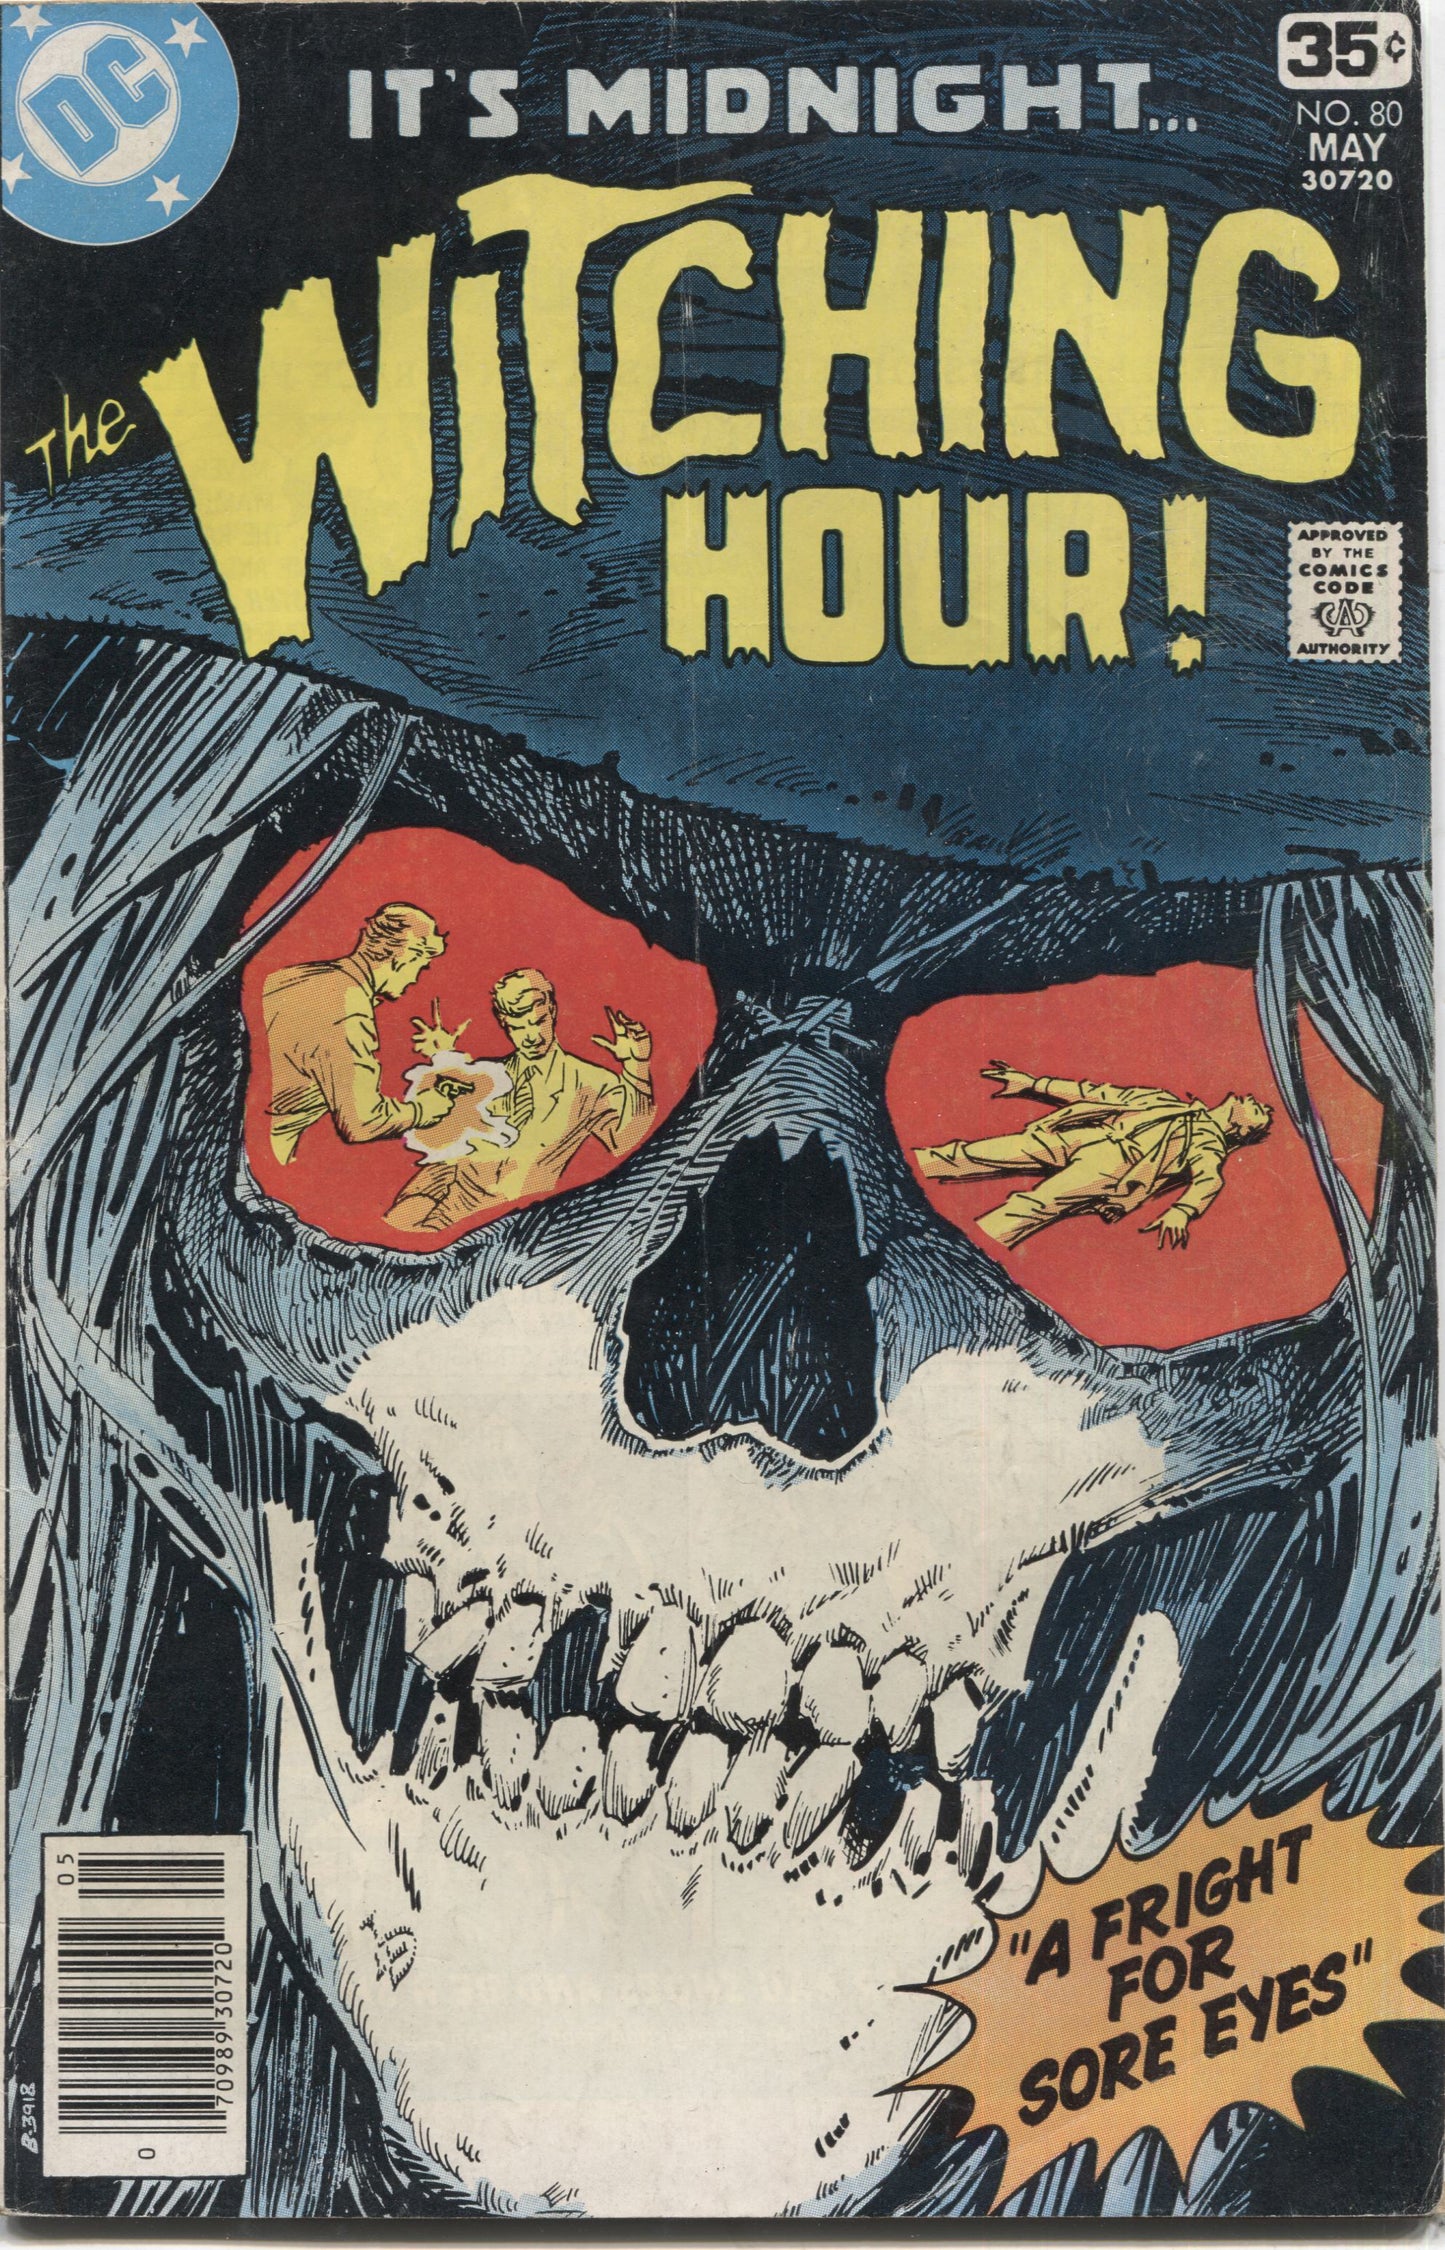 The Witching Hour No. 80, "A Fright For Sore Eyes," DC Comics, May 1978